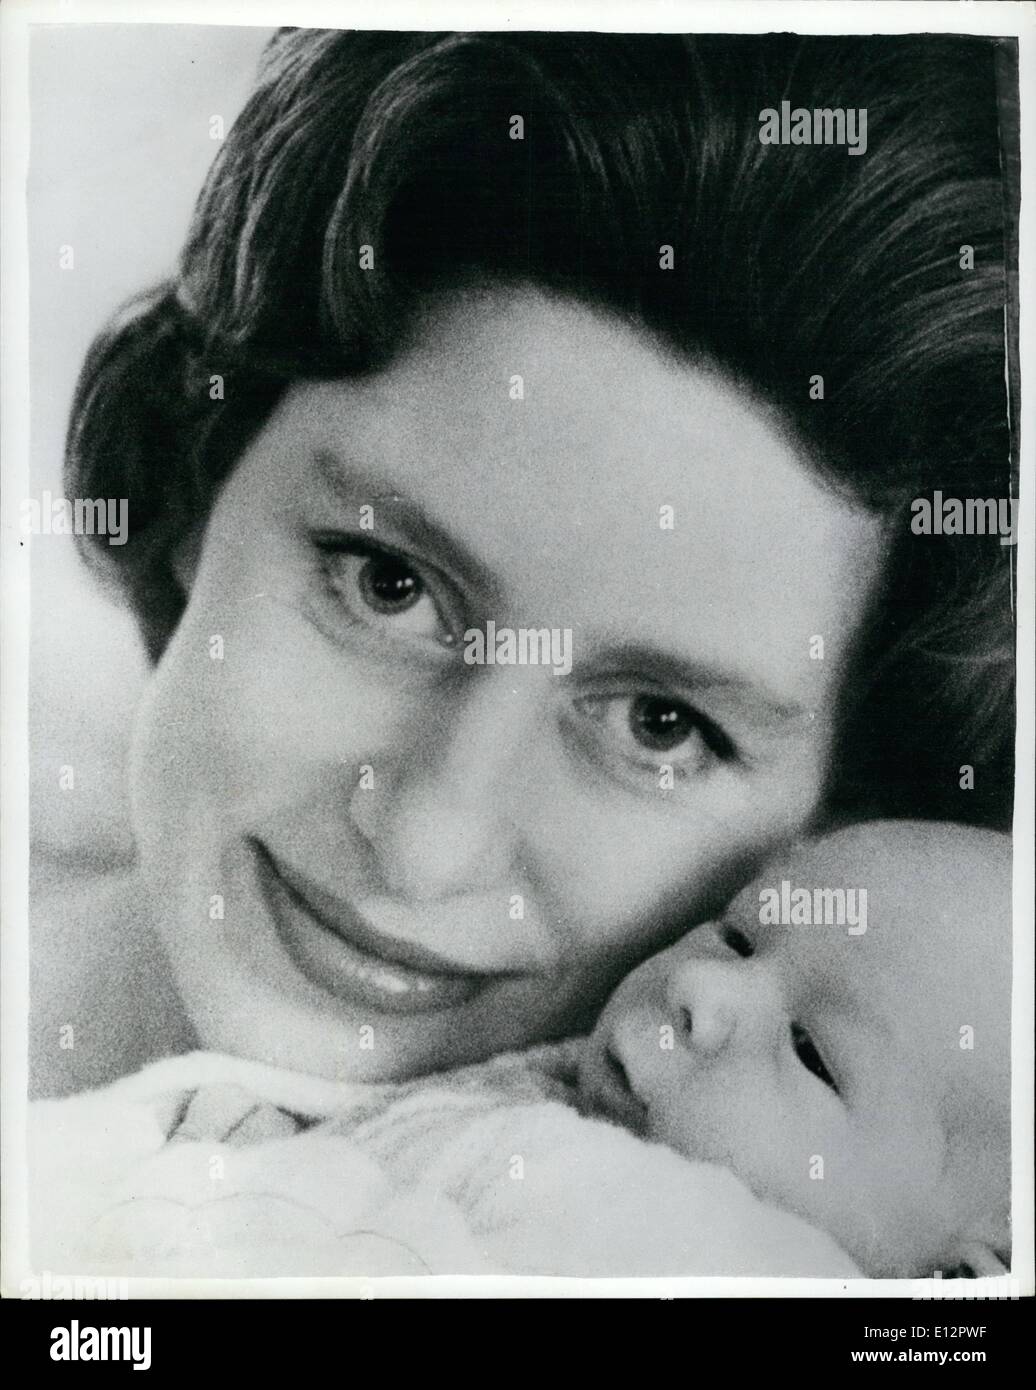 Feb. 24, 2012 - H.R.H. Princess Margaret and her baby son: The first photographs of the baby son born to H.R.H. Princess Margaret - Countess of Snowdon were taken by the baby's father - the Earl of Snowdon.. They are being issued throughout the world and it is expected that the issue of the pictures will bring in about &pound;10,000 - and although no details of the financial aspect have been given it is believed that the Earl's portion of the income will be donated to charity. The Earl gave up his photographic career when he married Princess Margaret Stock Photo